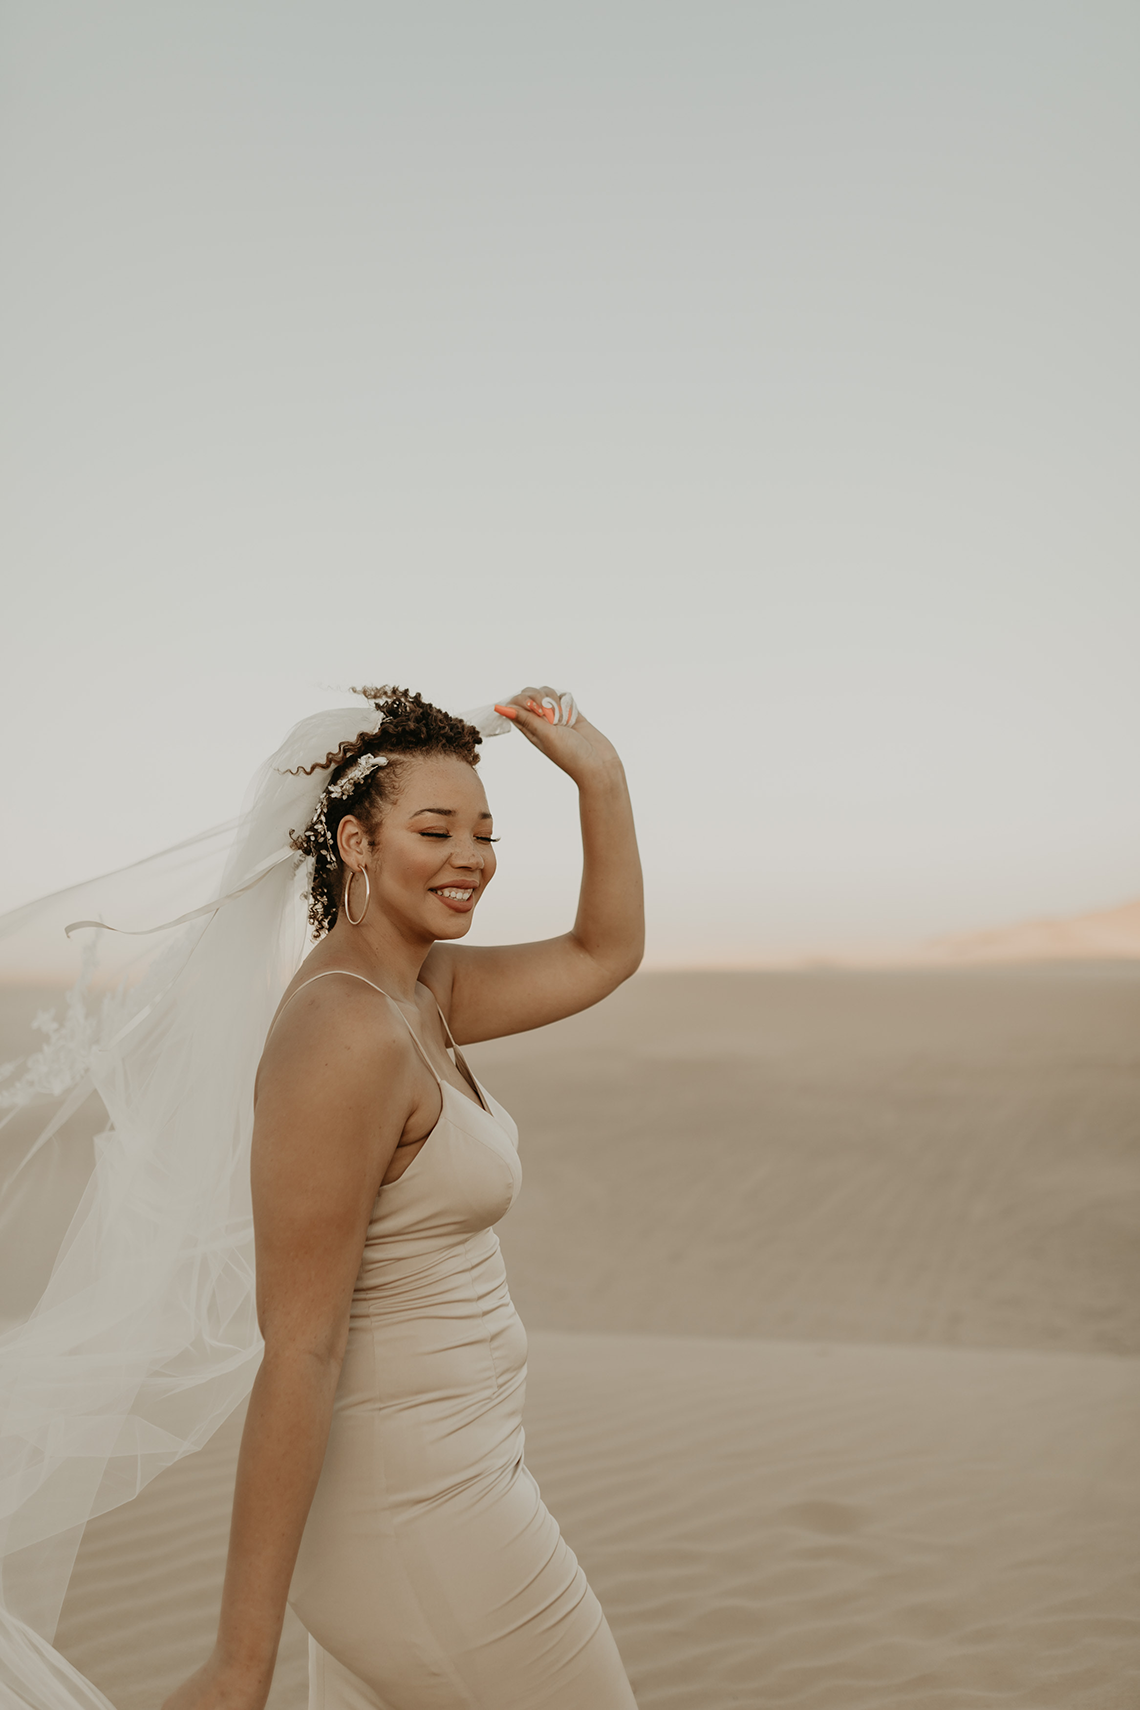 Desert Sand Dune Wedding Inspiration with Natural Hair Ideas for Black Brides – Tor Hawley – The LAW Bridal 32